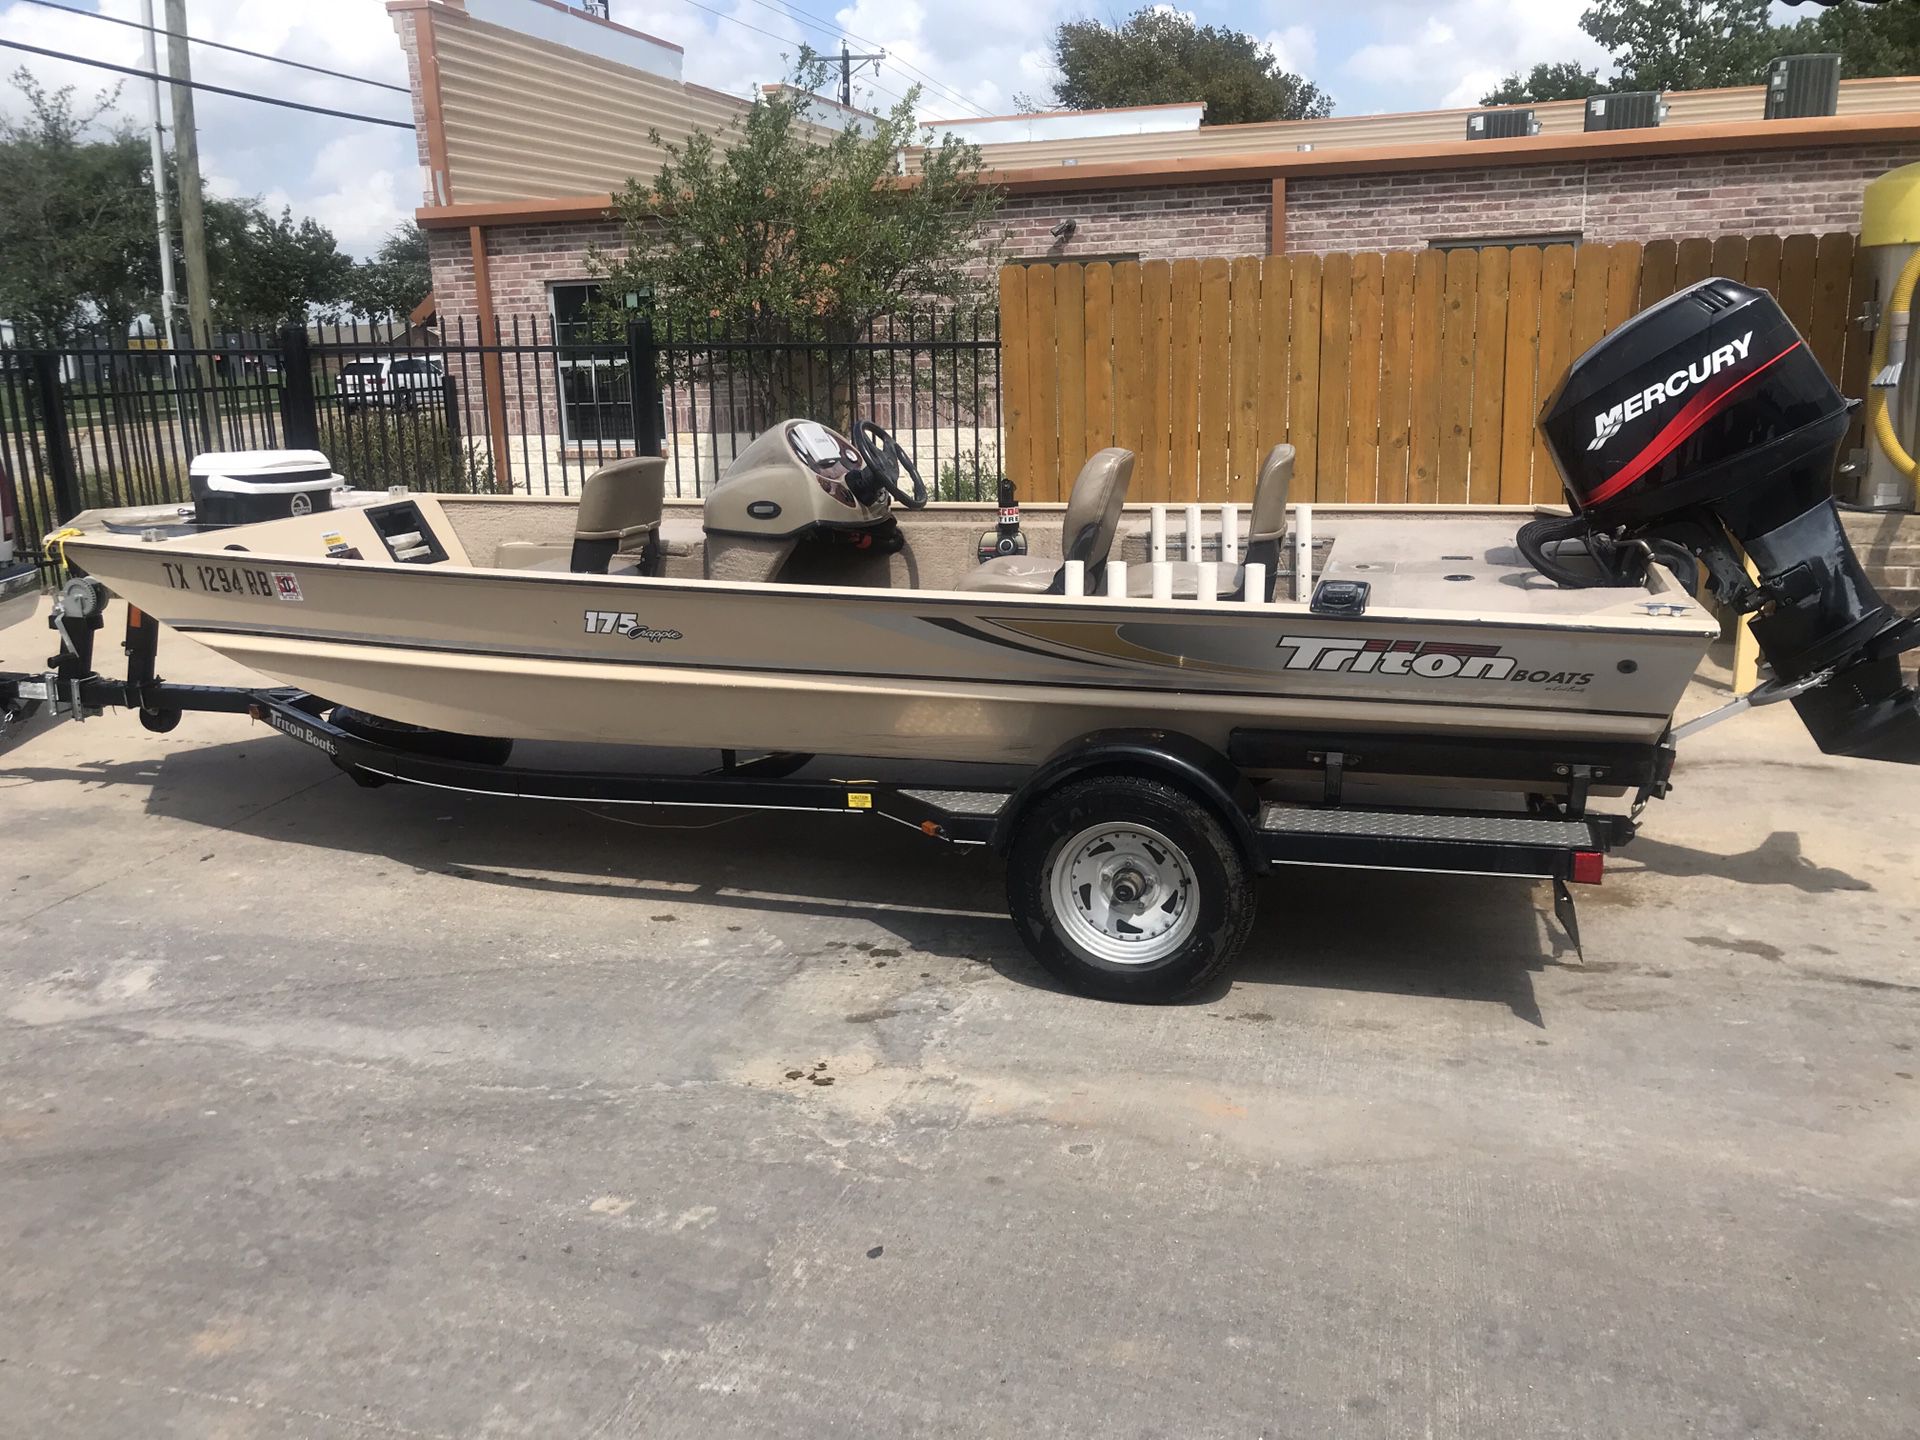 2003 triton 175 aluminum bass boat with 50hp mercury engine runs great and looks great